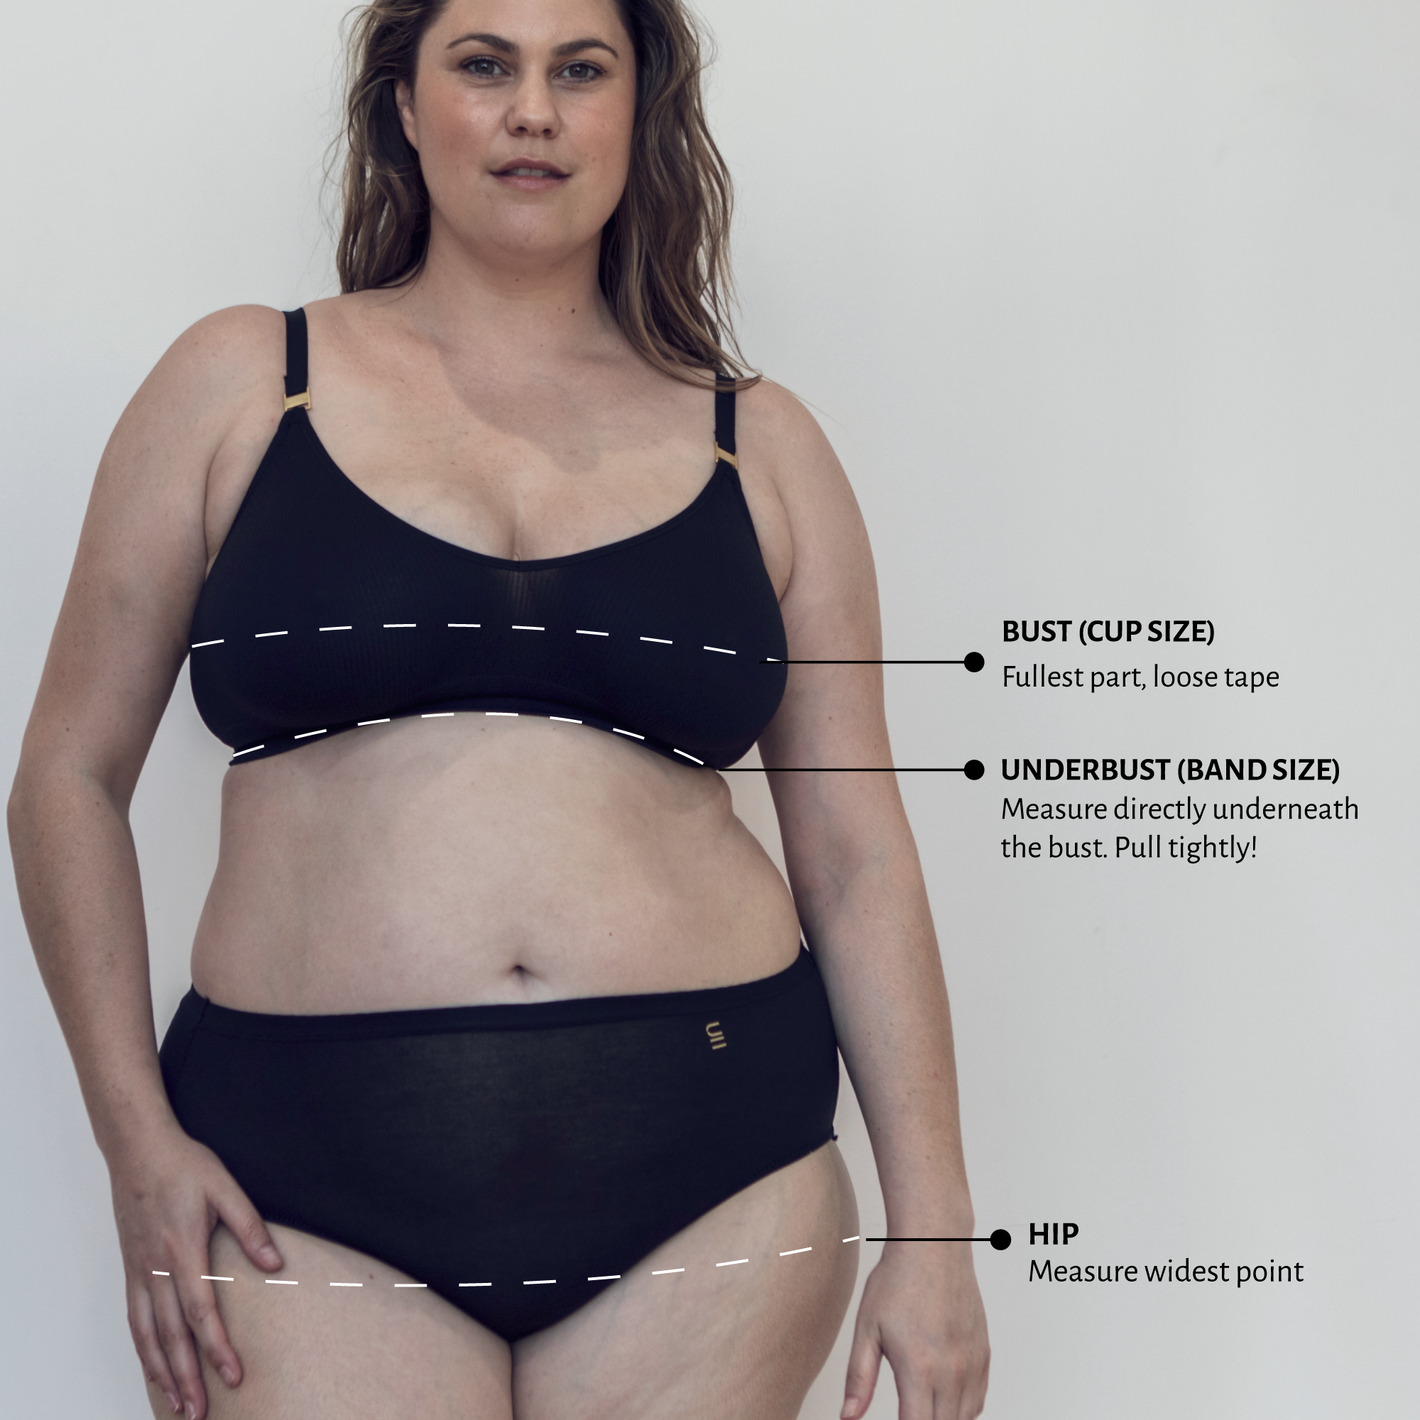 Fit & sizing – Underwear for Humanity